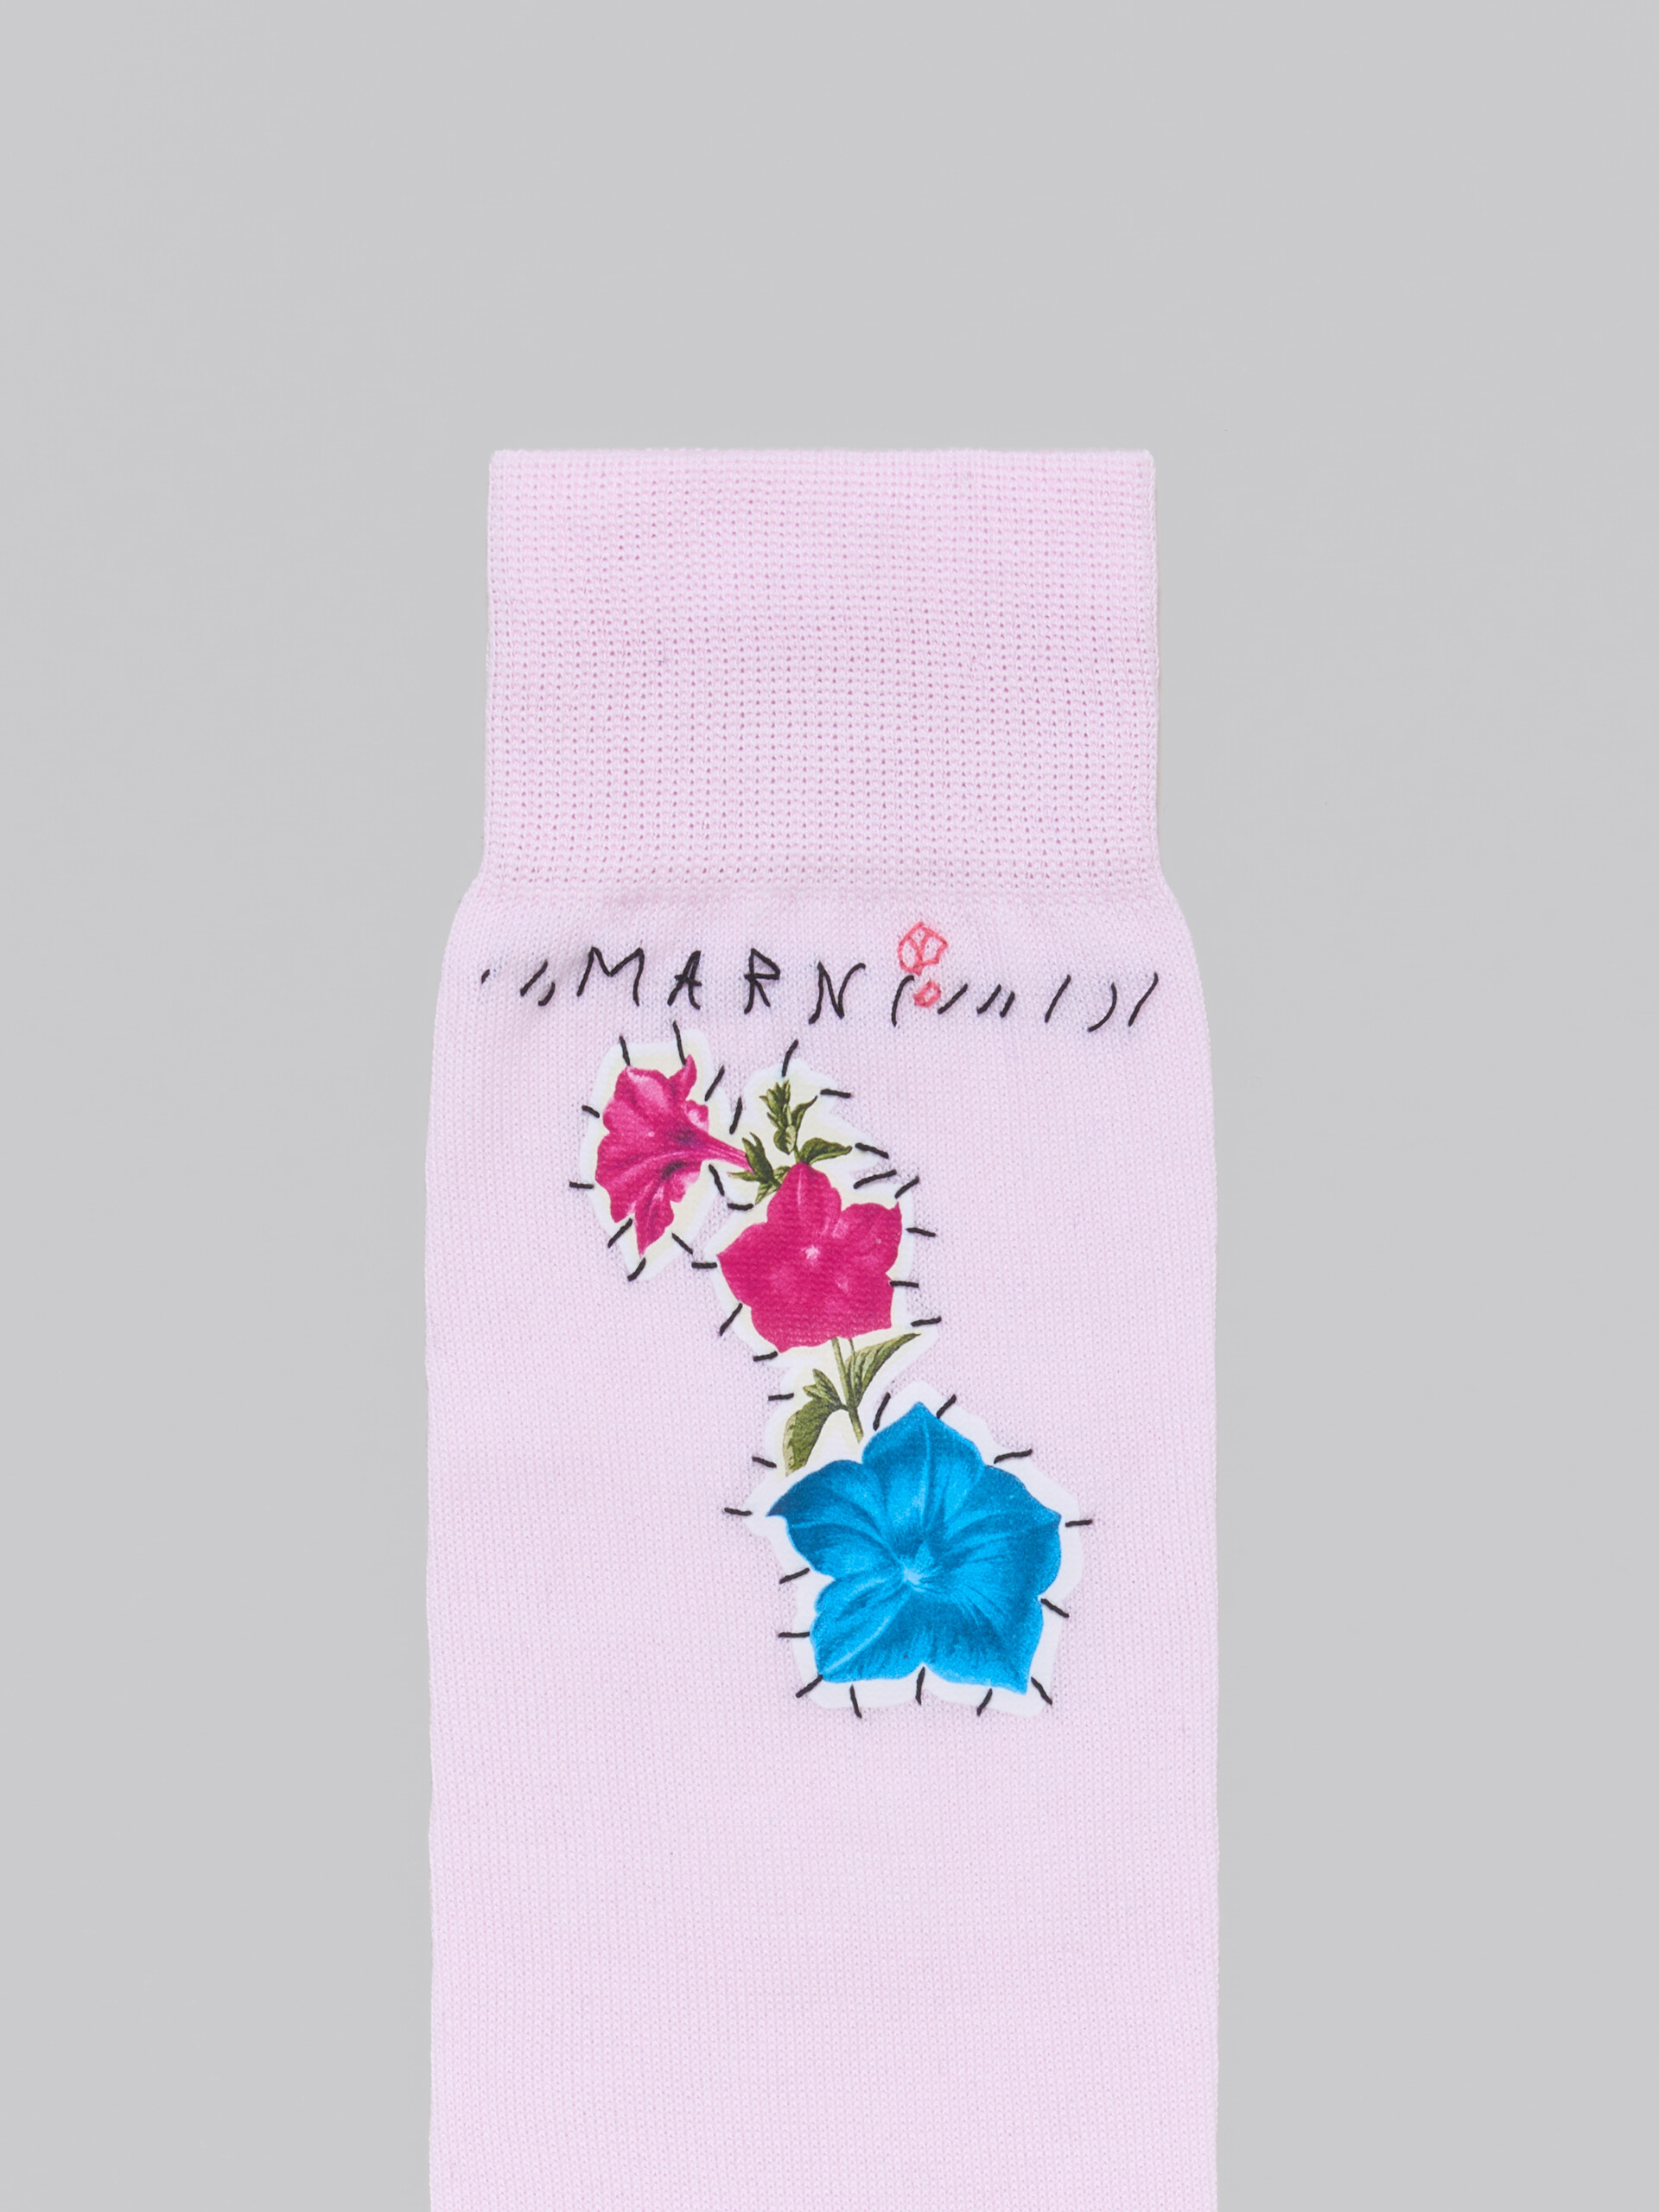 Pink cotton socks with flower patches - Socks - Image 3